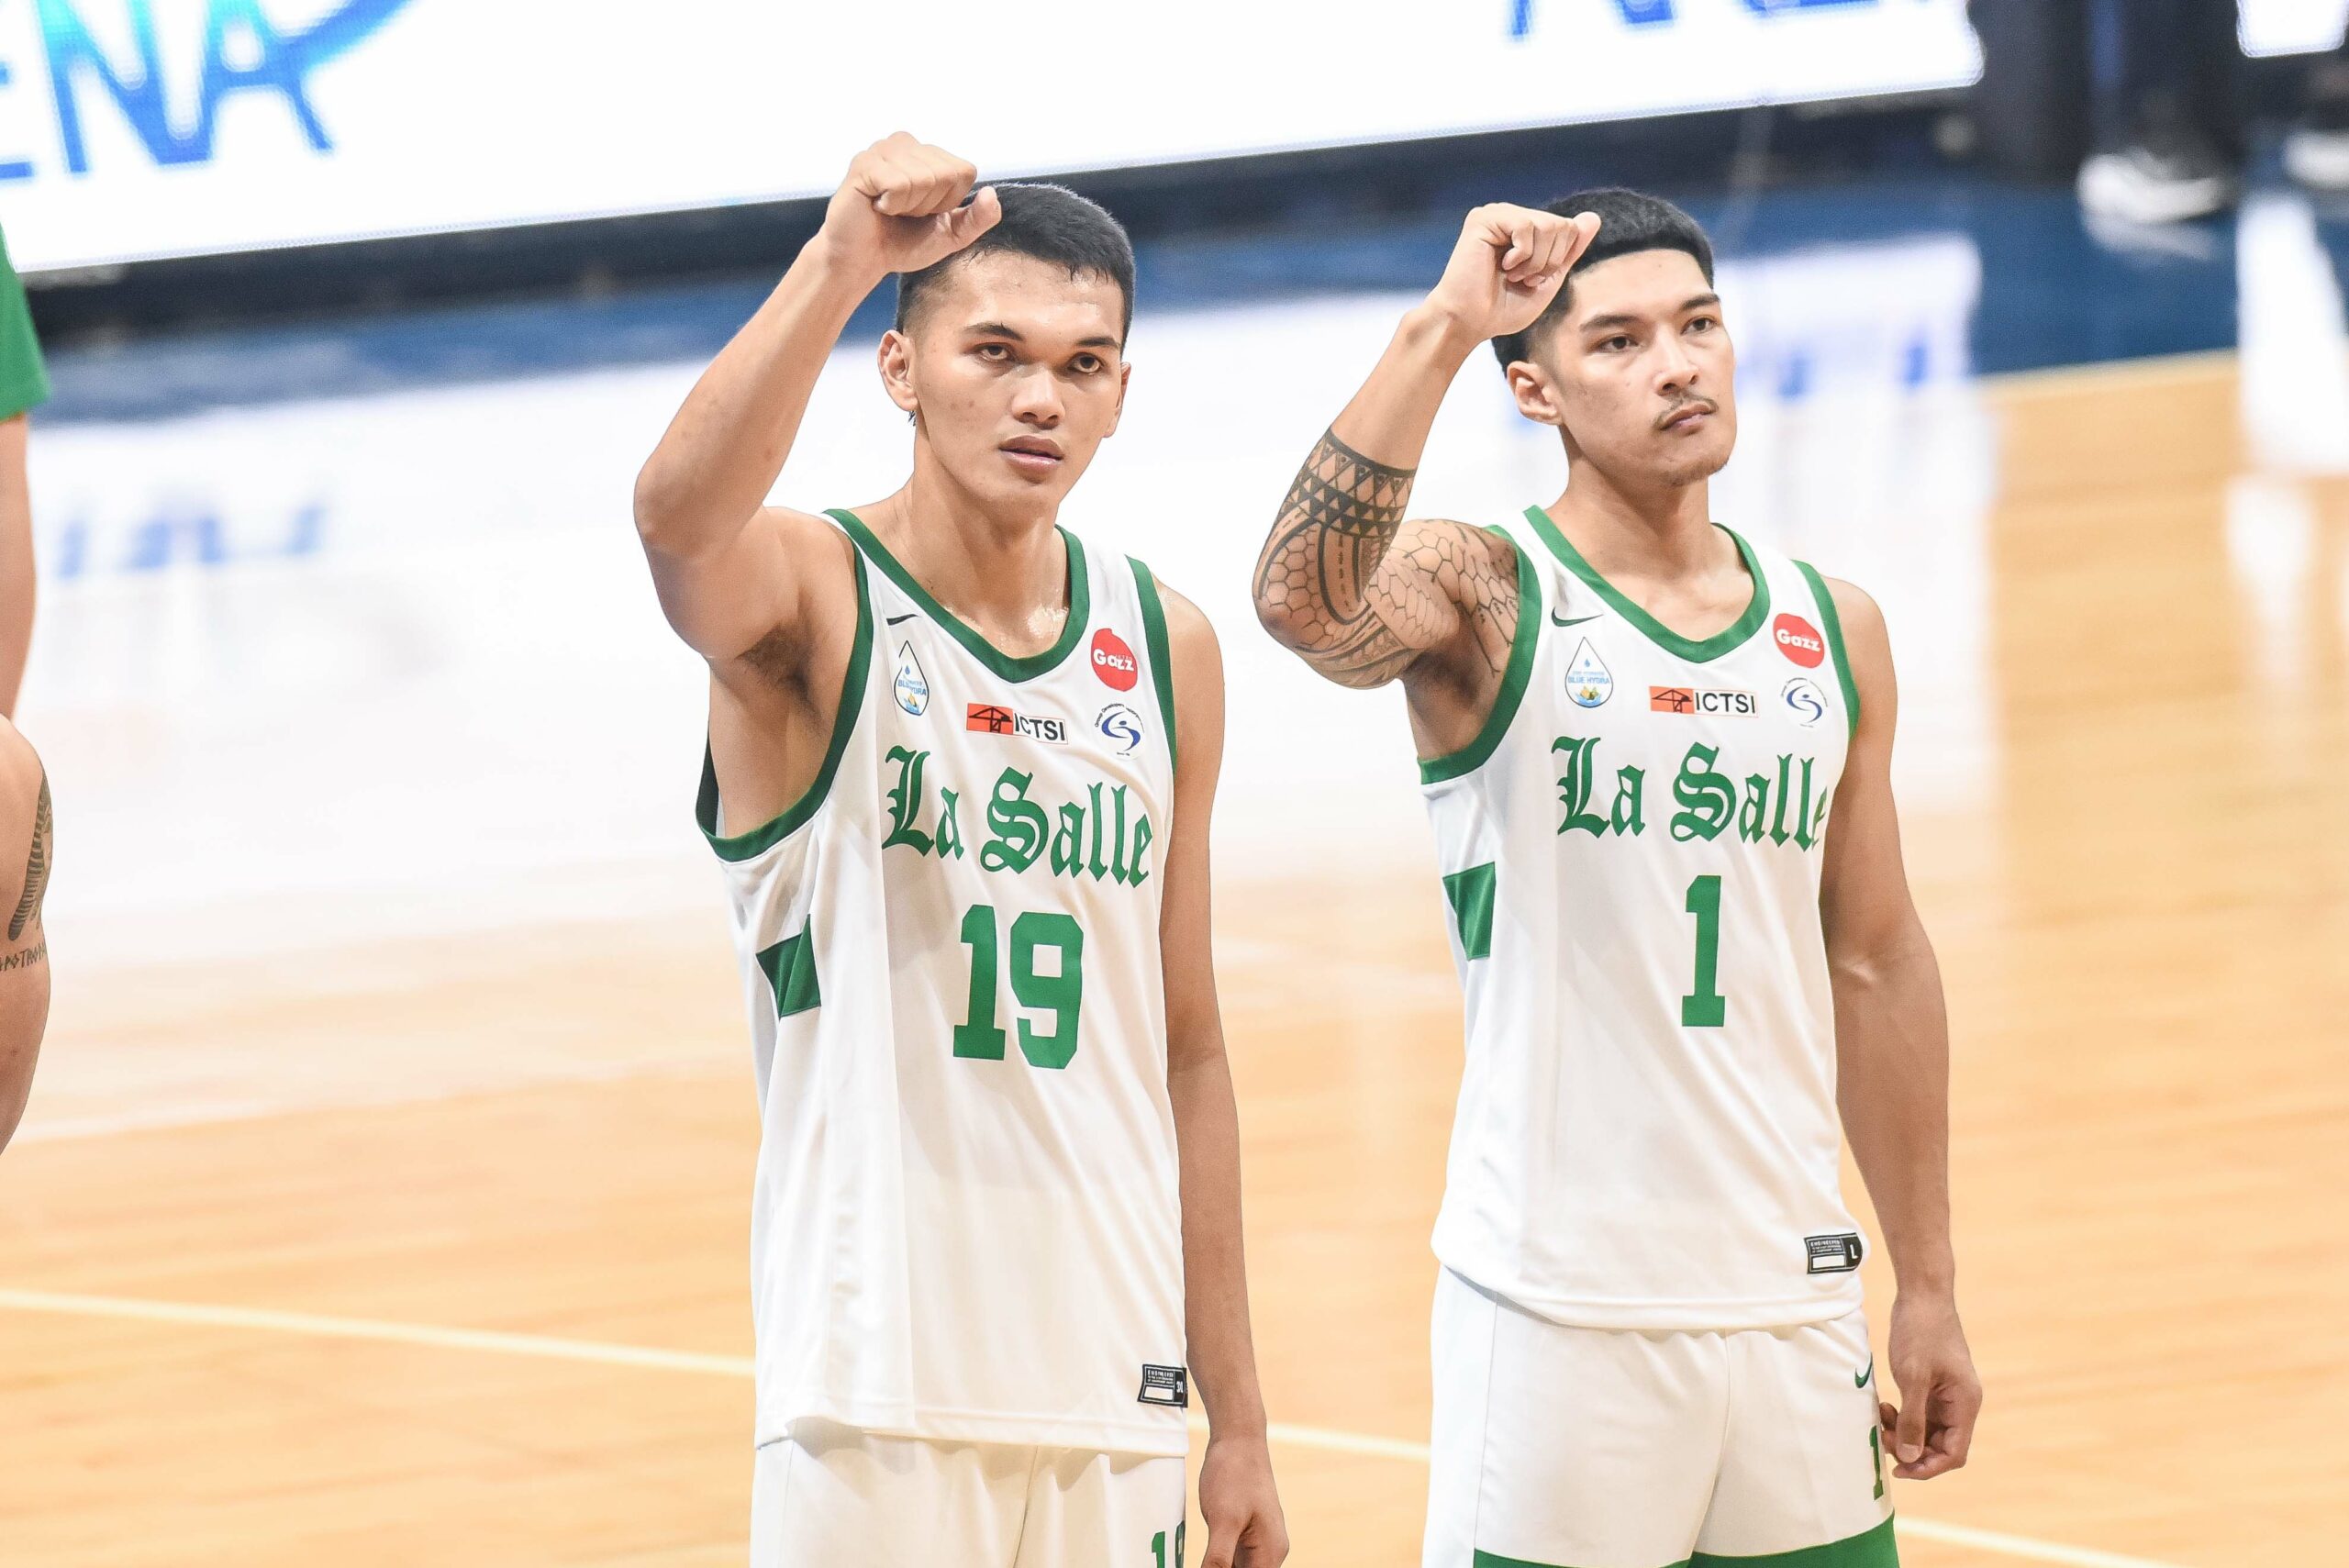 UAAP-84-Mens-Basketball-DLSU-vs-UP-Justine-Baltazar-2-scaled UAAP 84: Tamayo powers UP's miracle comeback vs La Salle, punches Finals ticket Basketball DLSU News UAAP UP  - philippine sports news